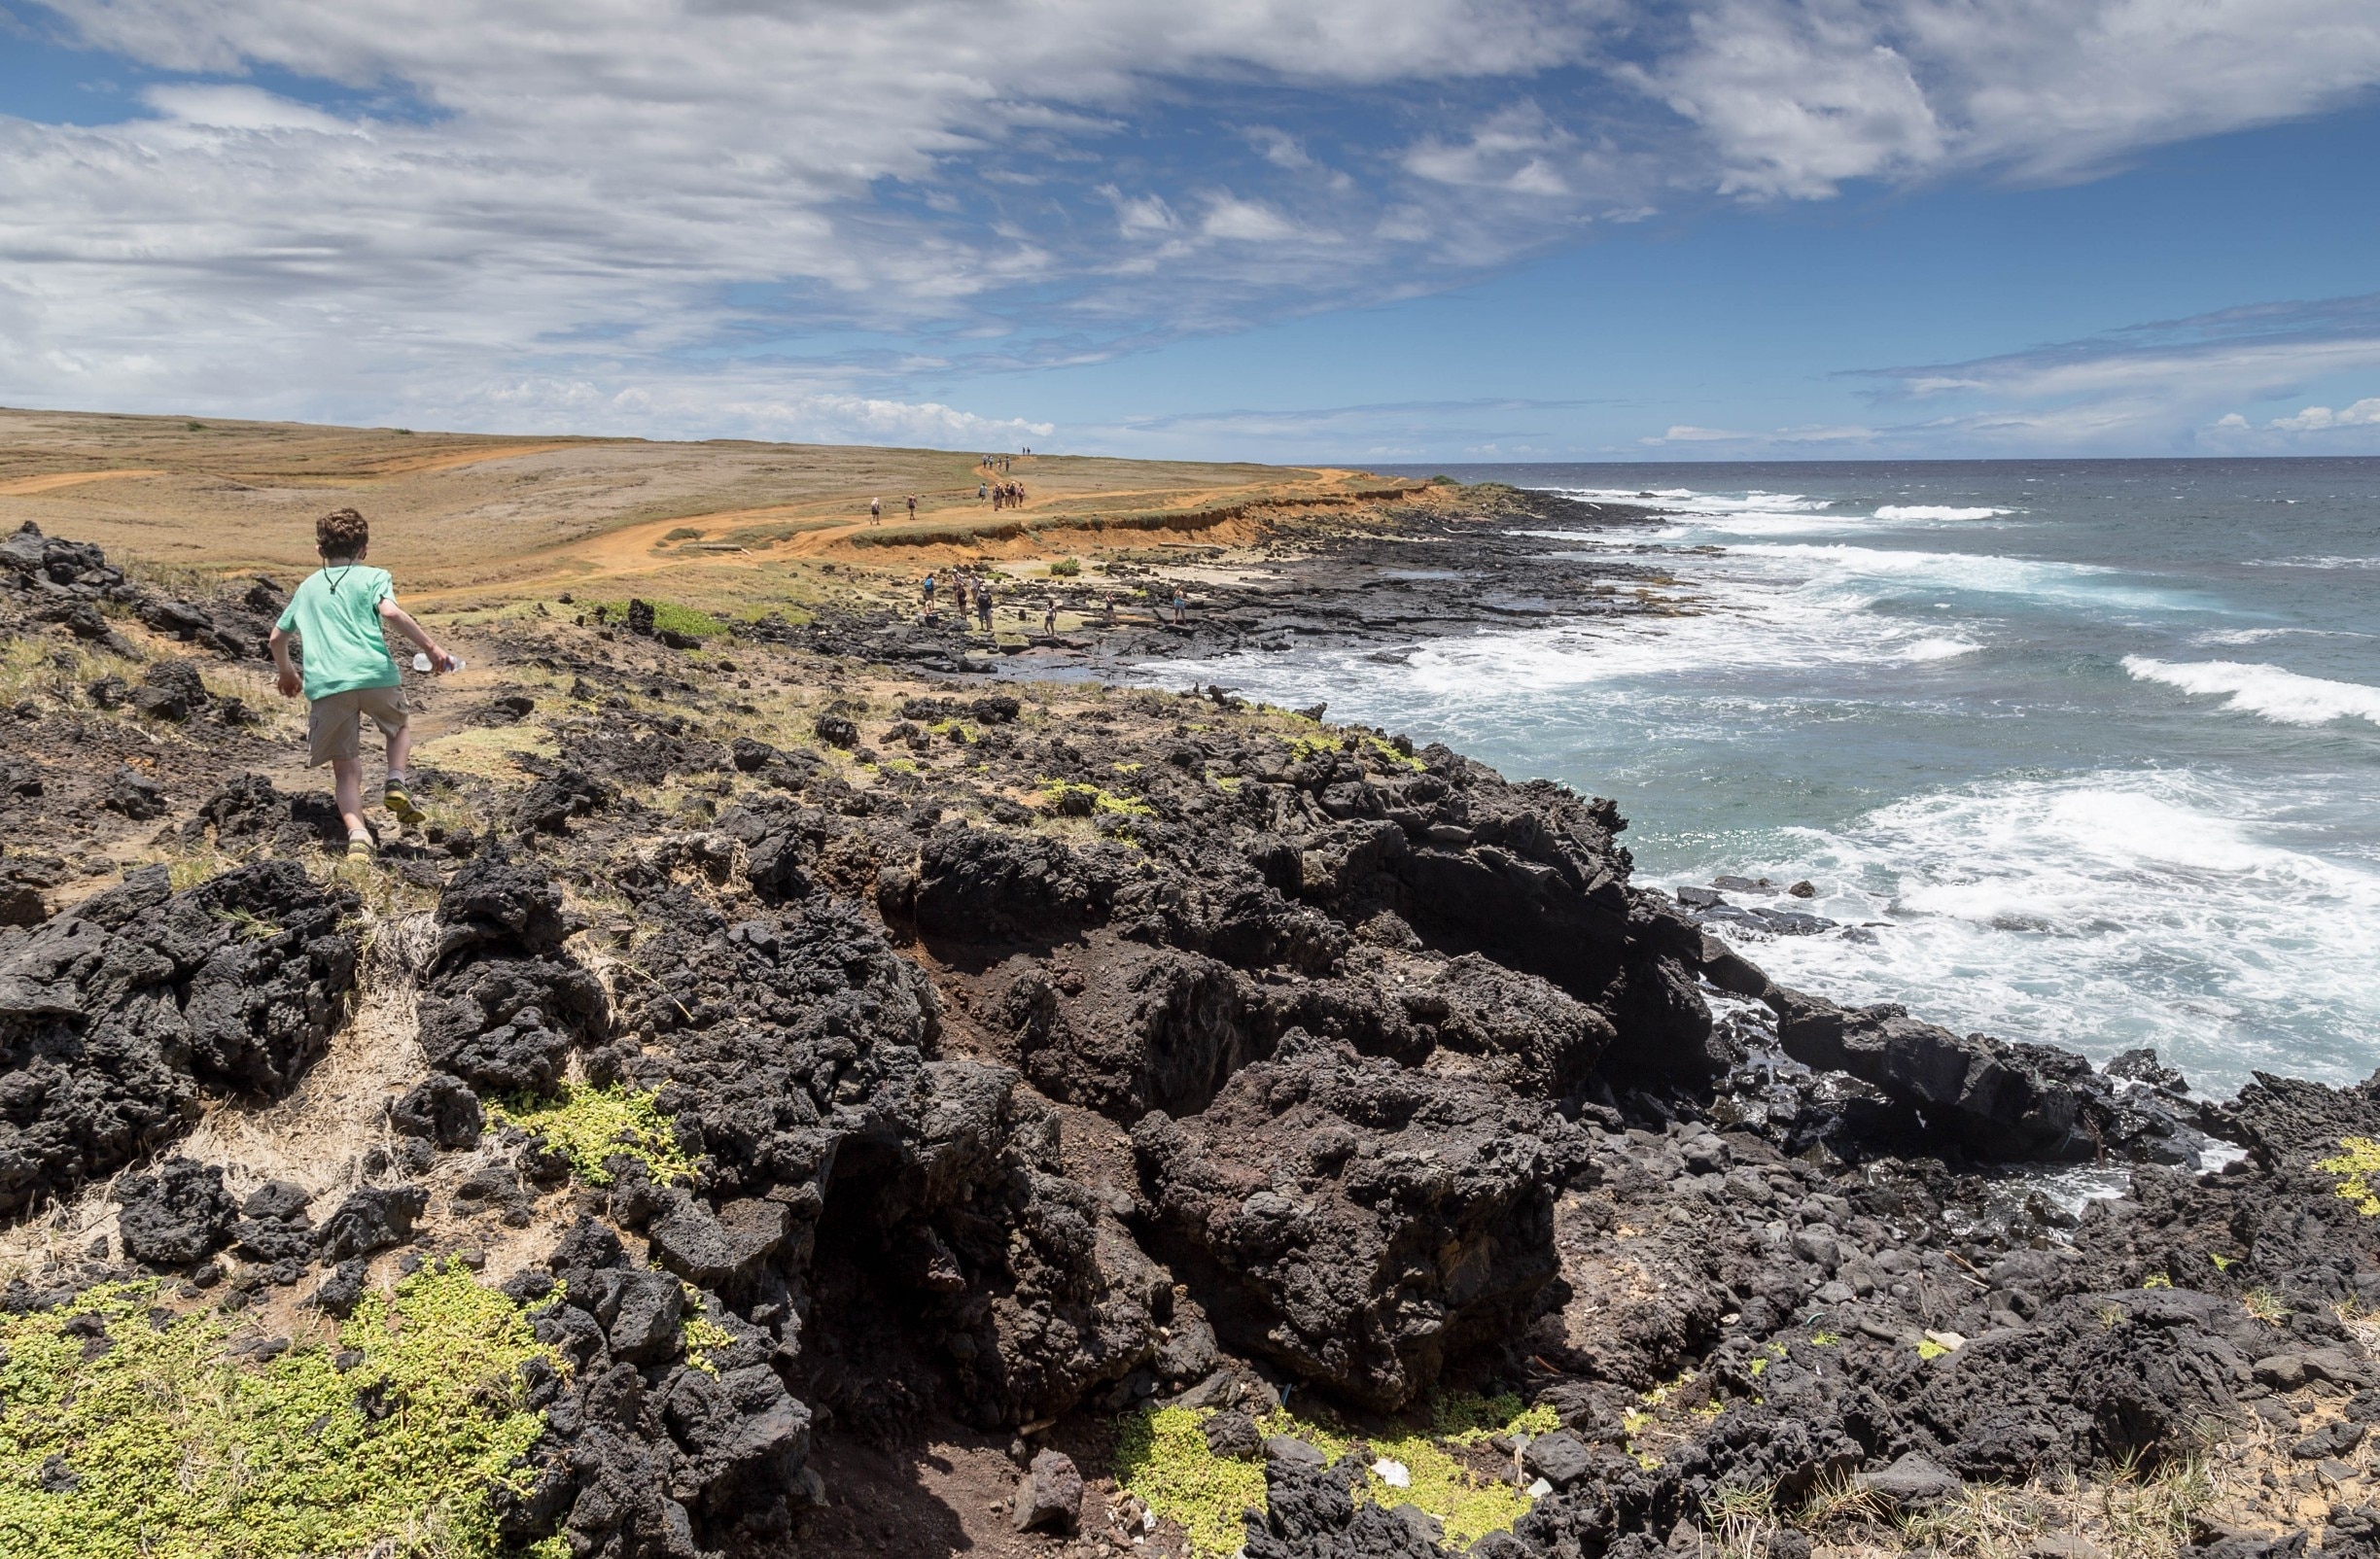 Coastal Trail from South Point to the Green Sand Beach, Hawaii.

#lifeatexpedia